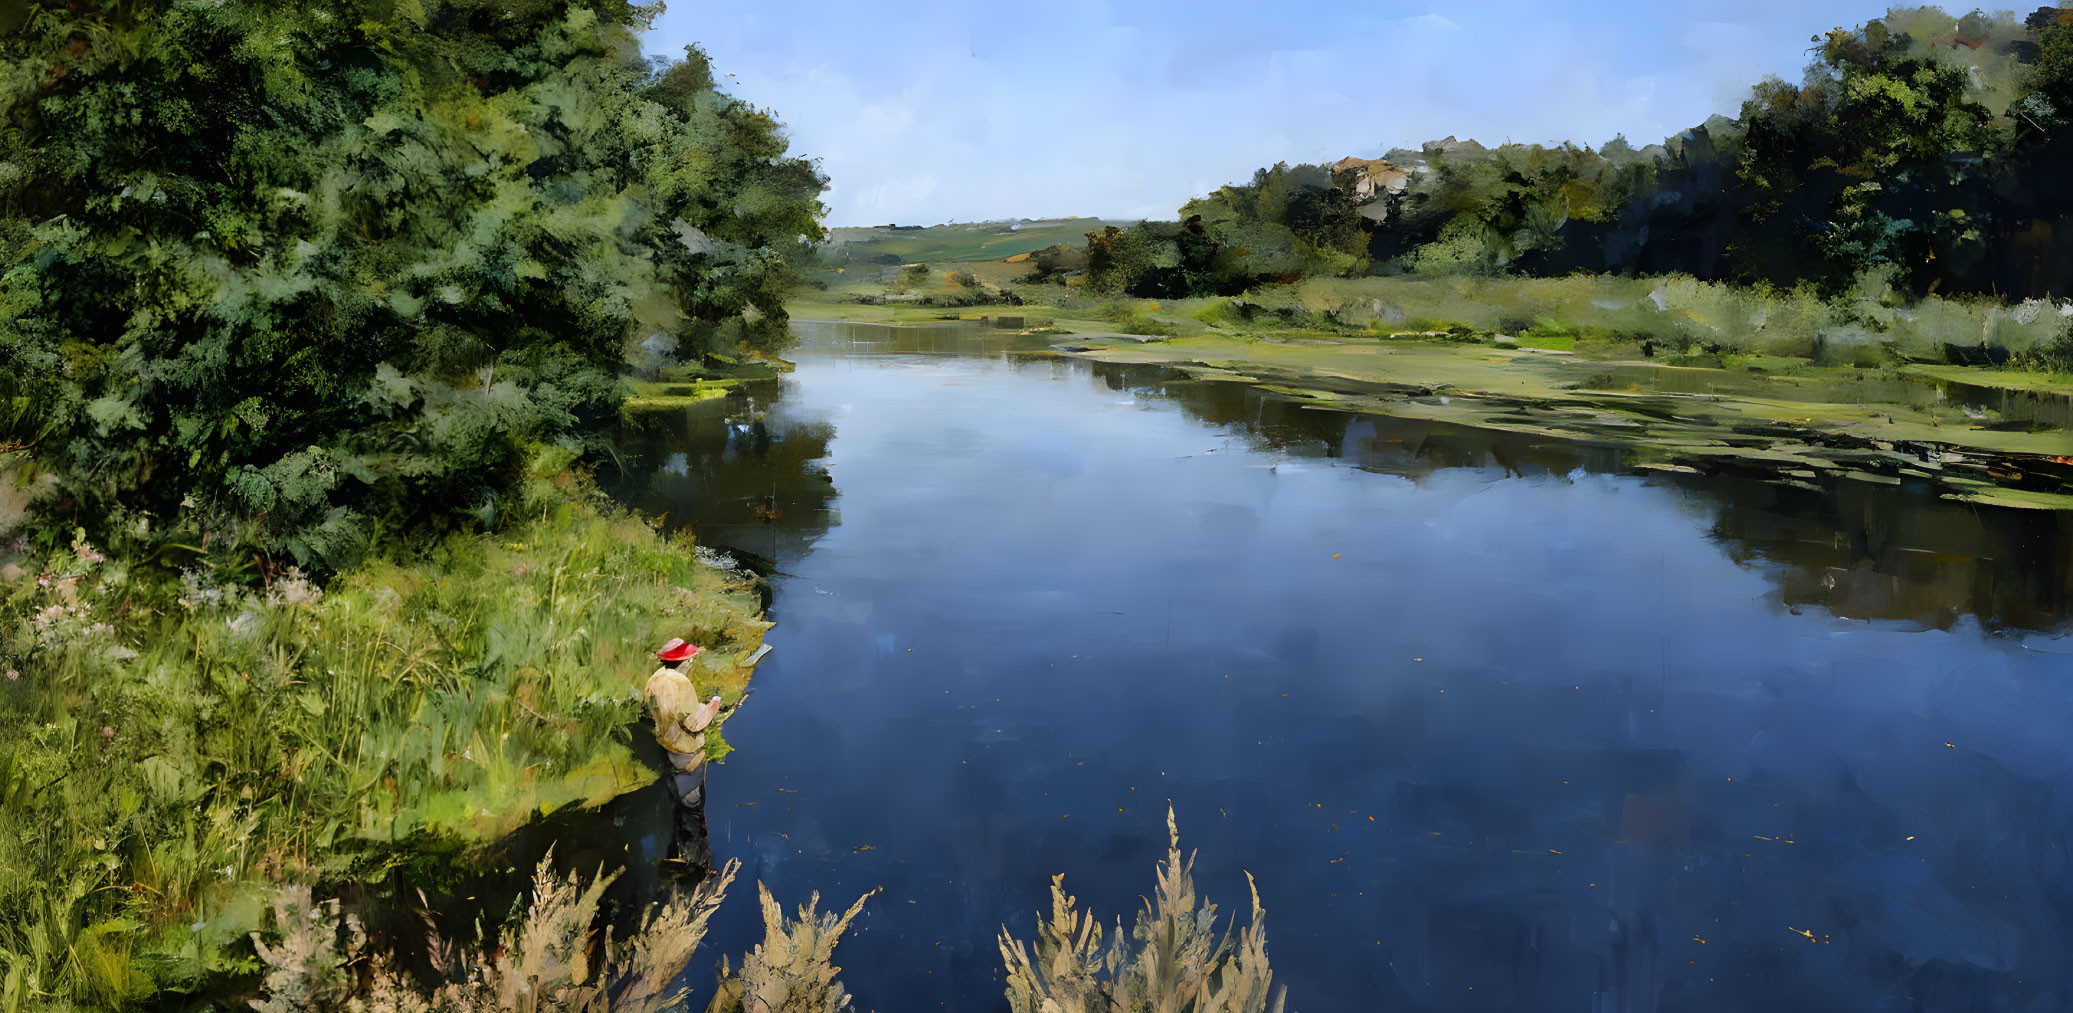 Tranquil landscape with river, green trees, and person fishing by water's edge